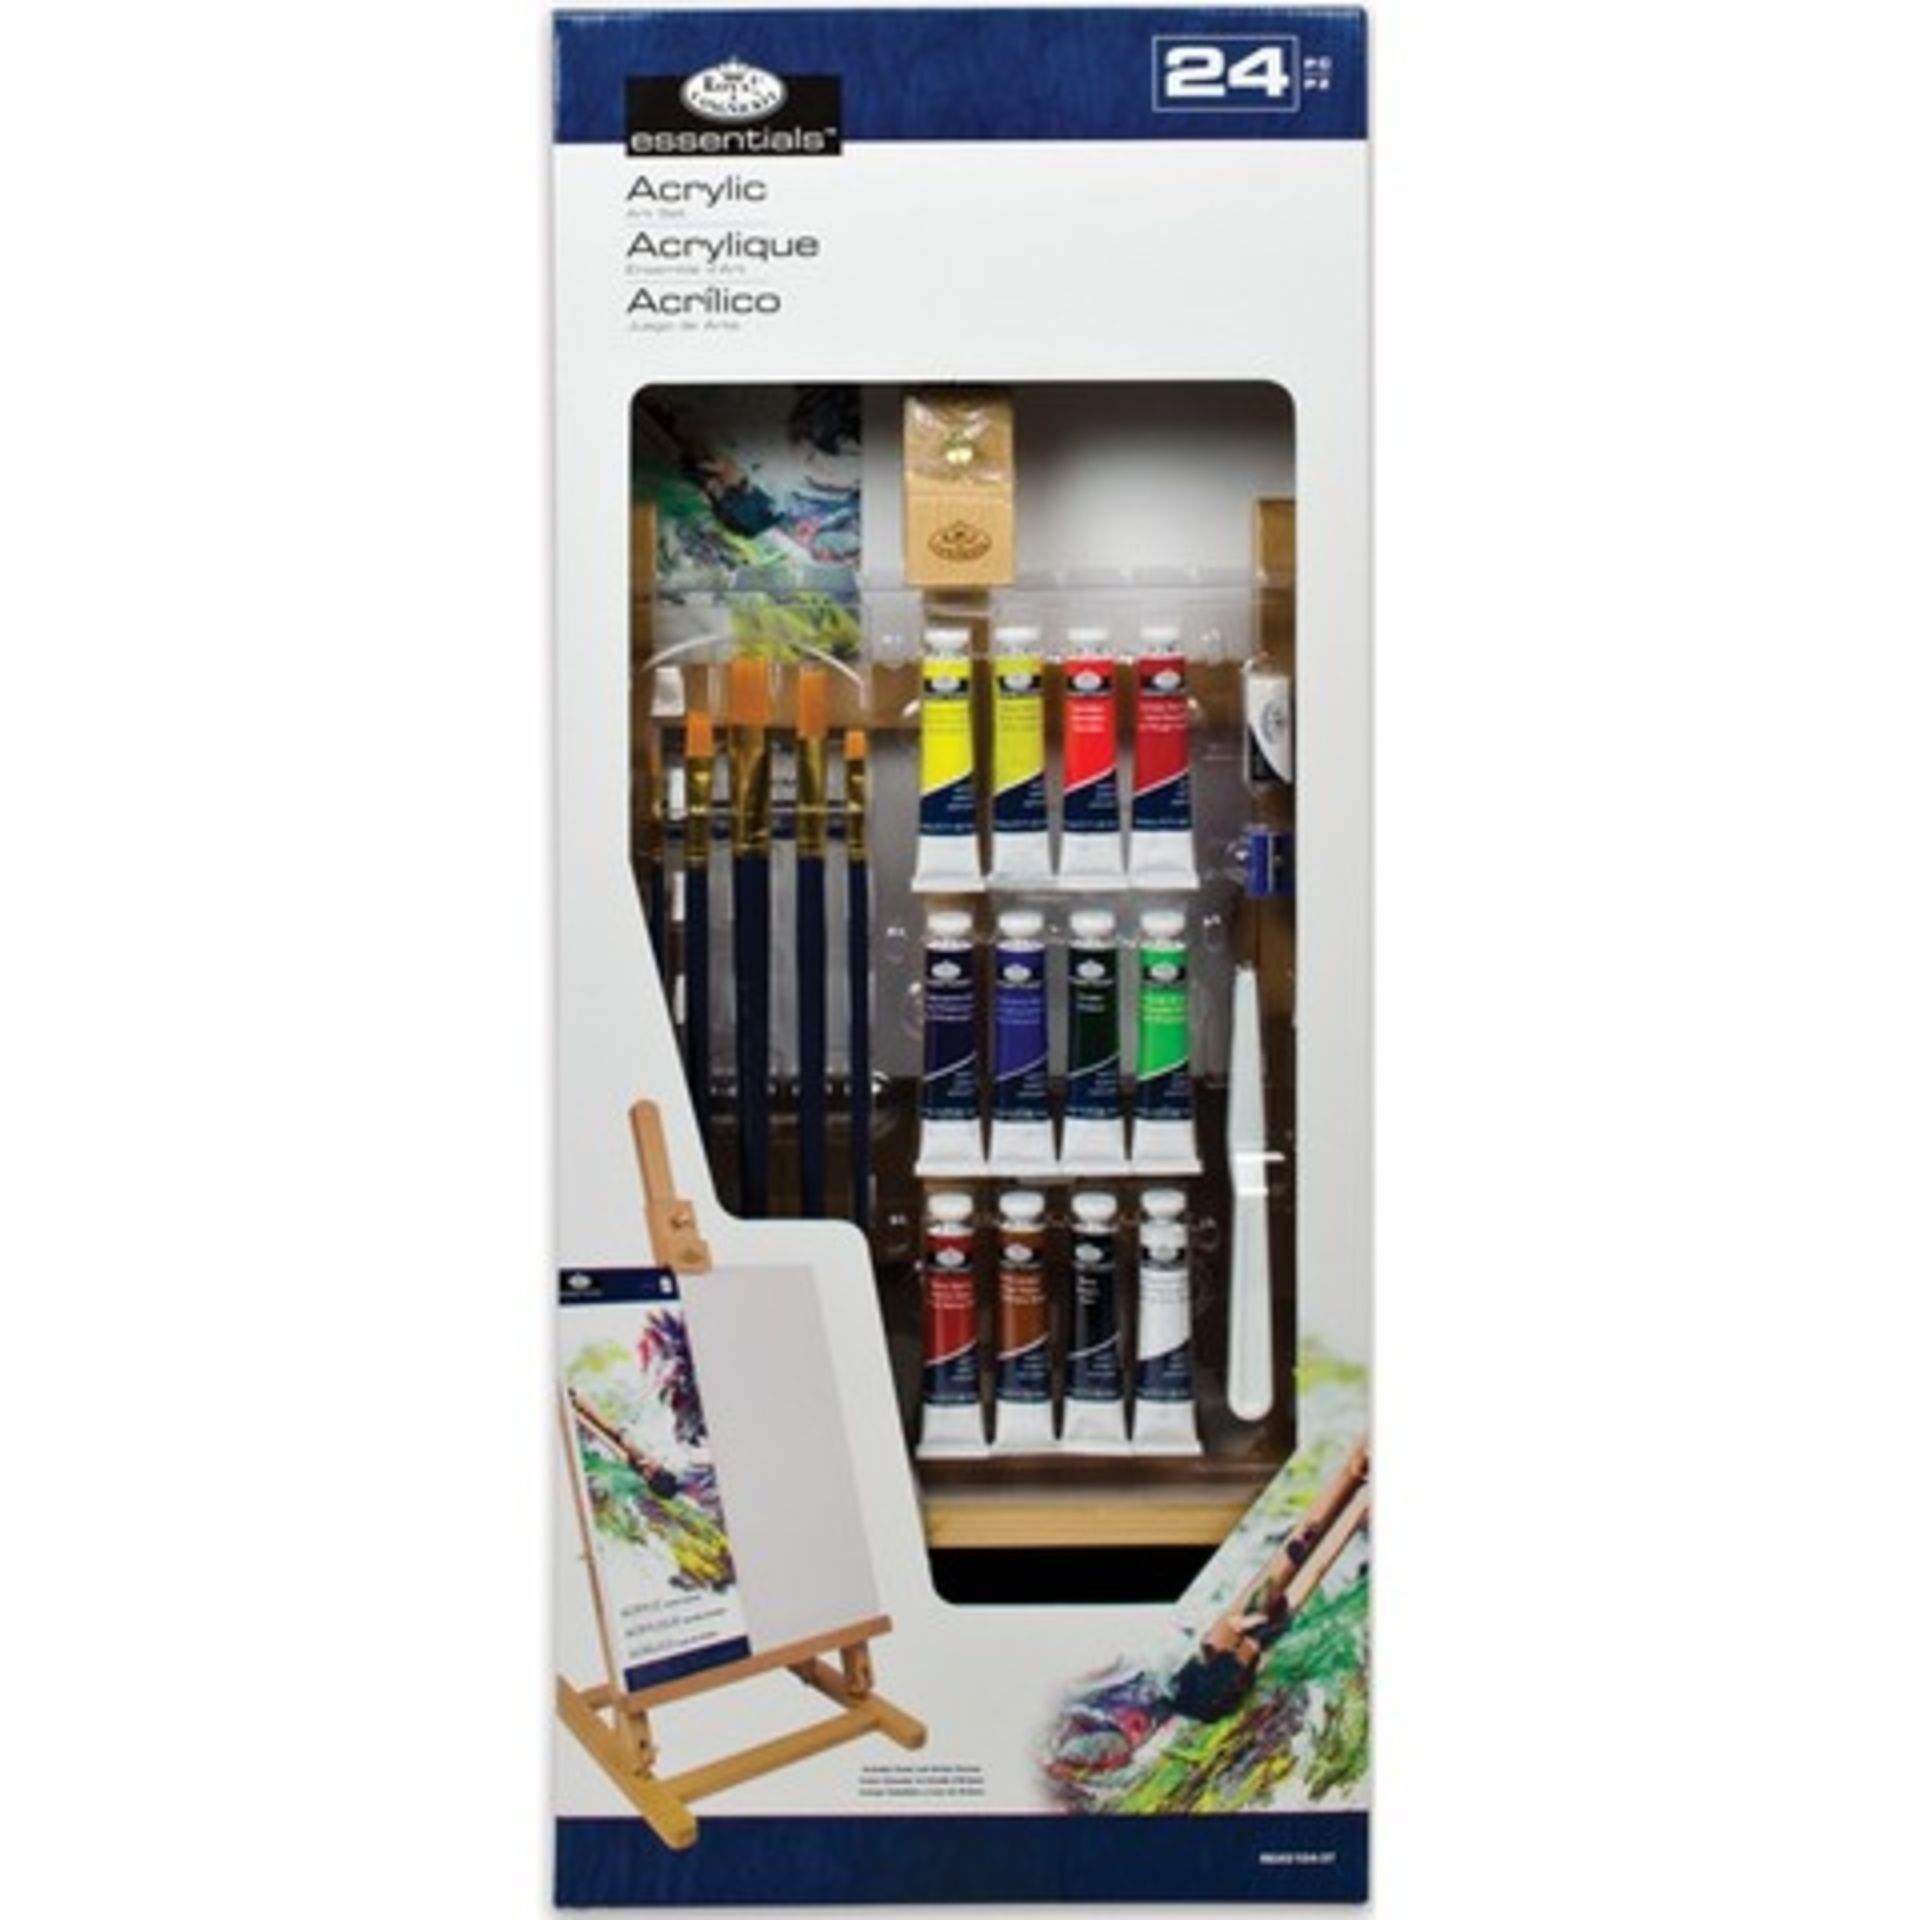 V Brand New Royal Langnickel 24 Piece Acrylic Paint Set inc Easel - 12 Acrylic Paints - 6 Gold - Image 2 of 2